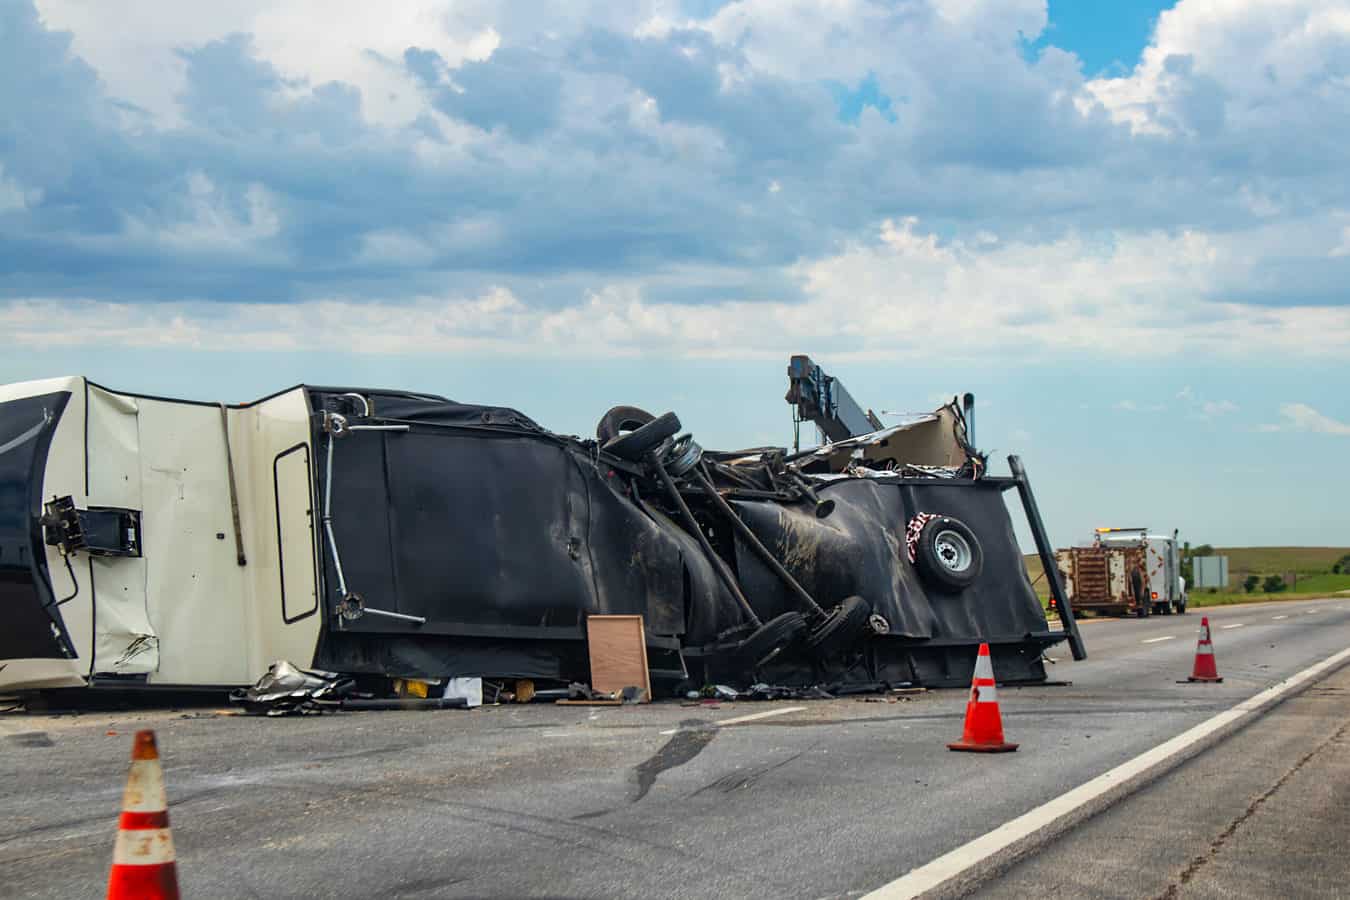 a 5th wheel camper crashed on the highway